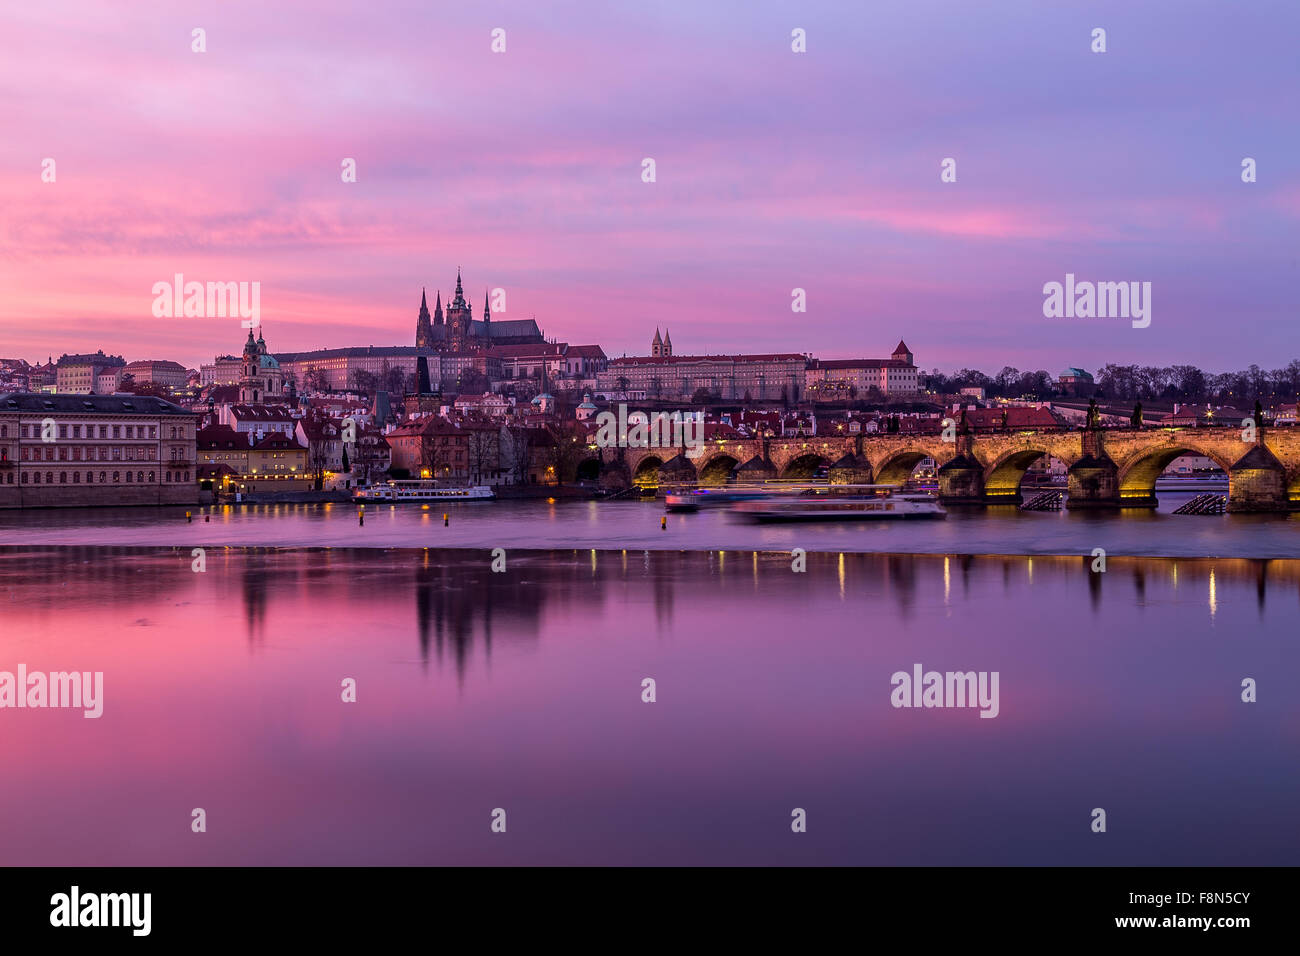 Charles Bridge in Prague, towards the Lesser Quarter and Prague Castle at sunset with a colorful vibrant sky. Stock Photo